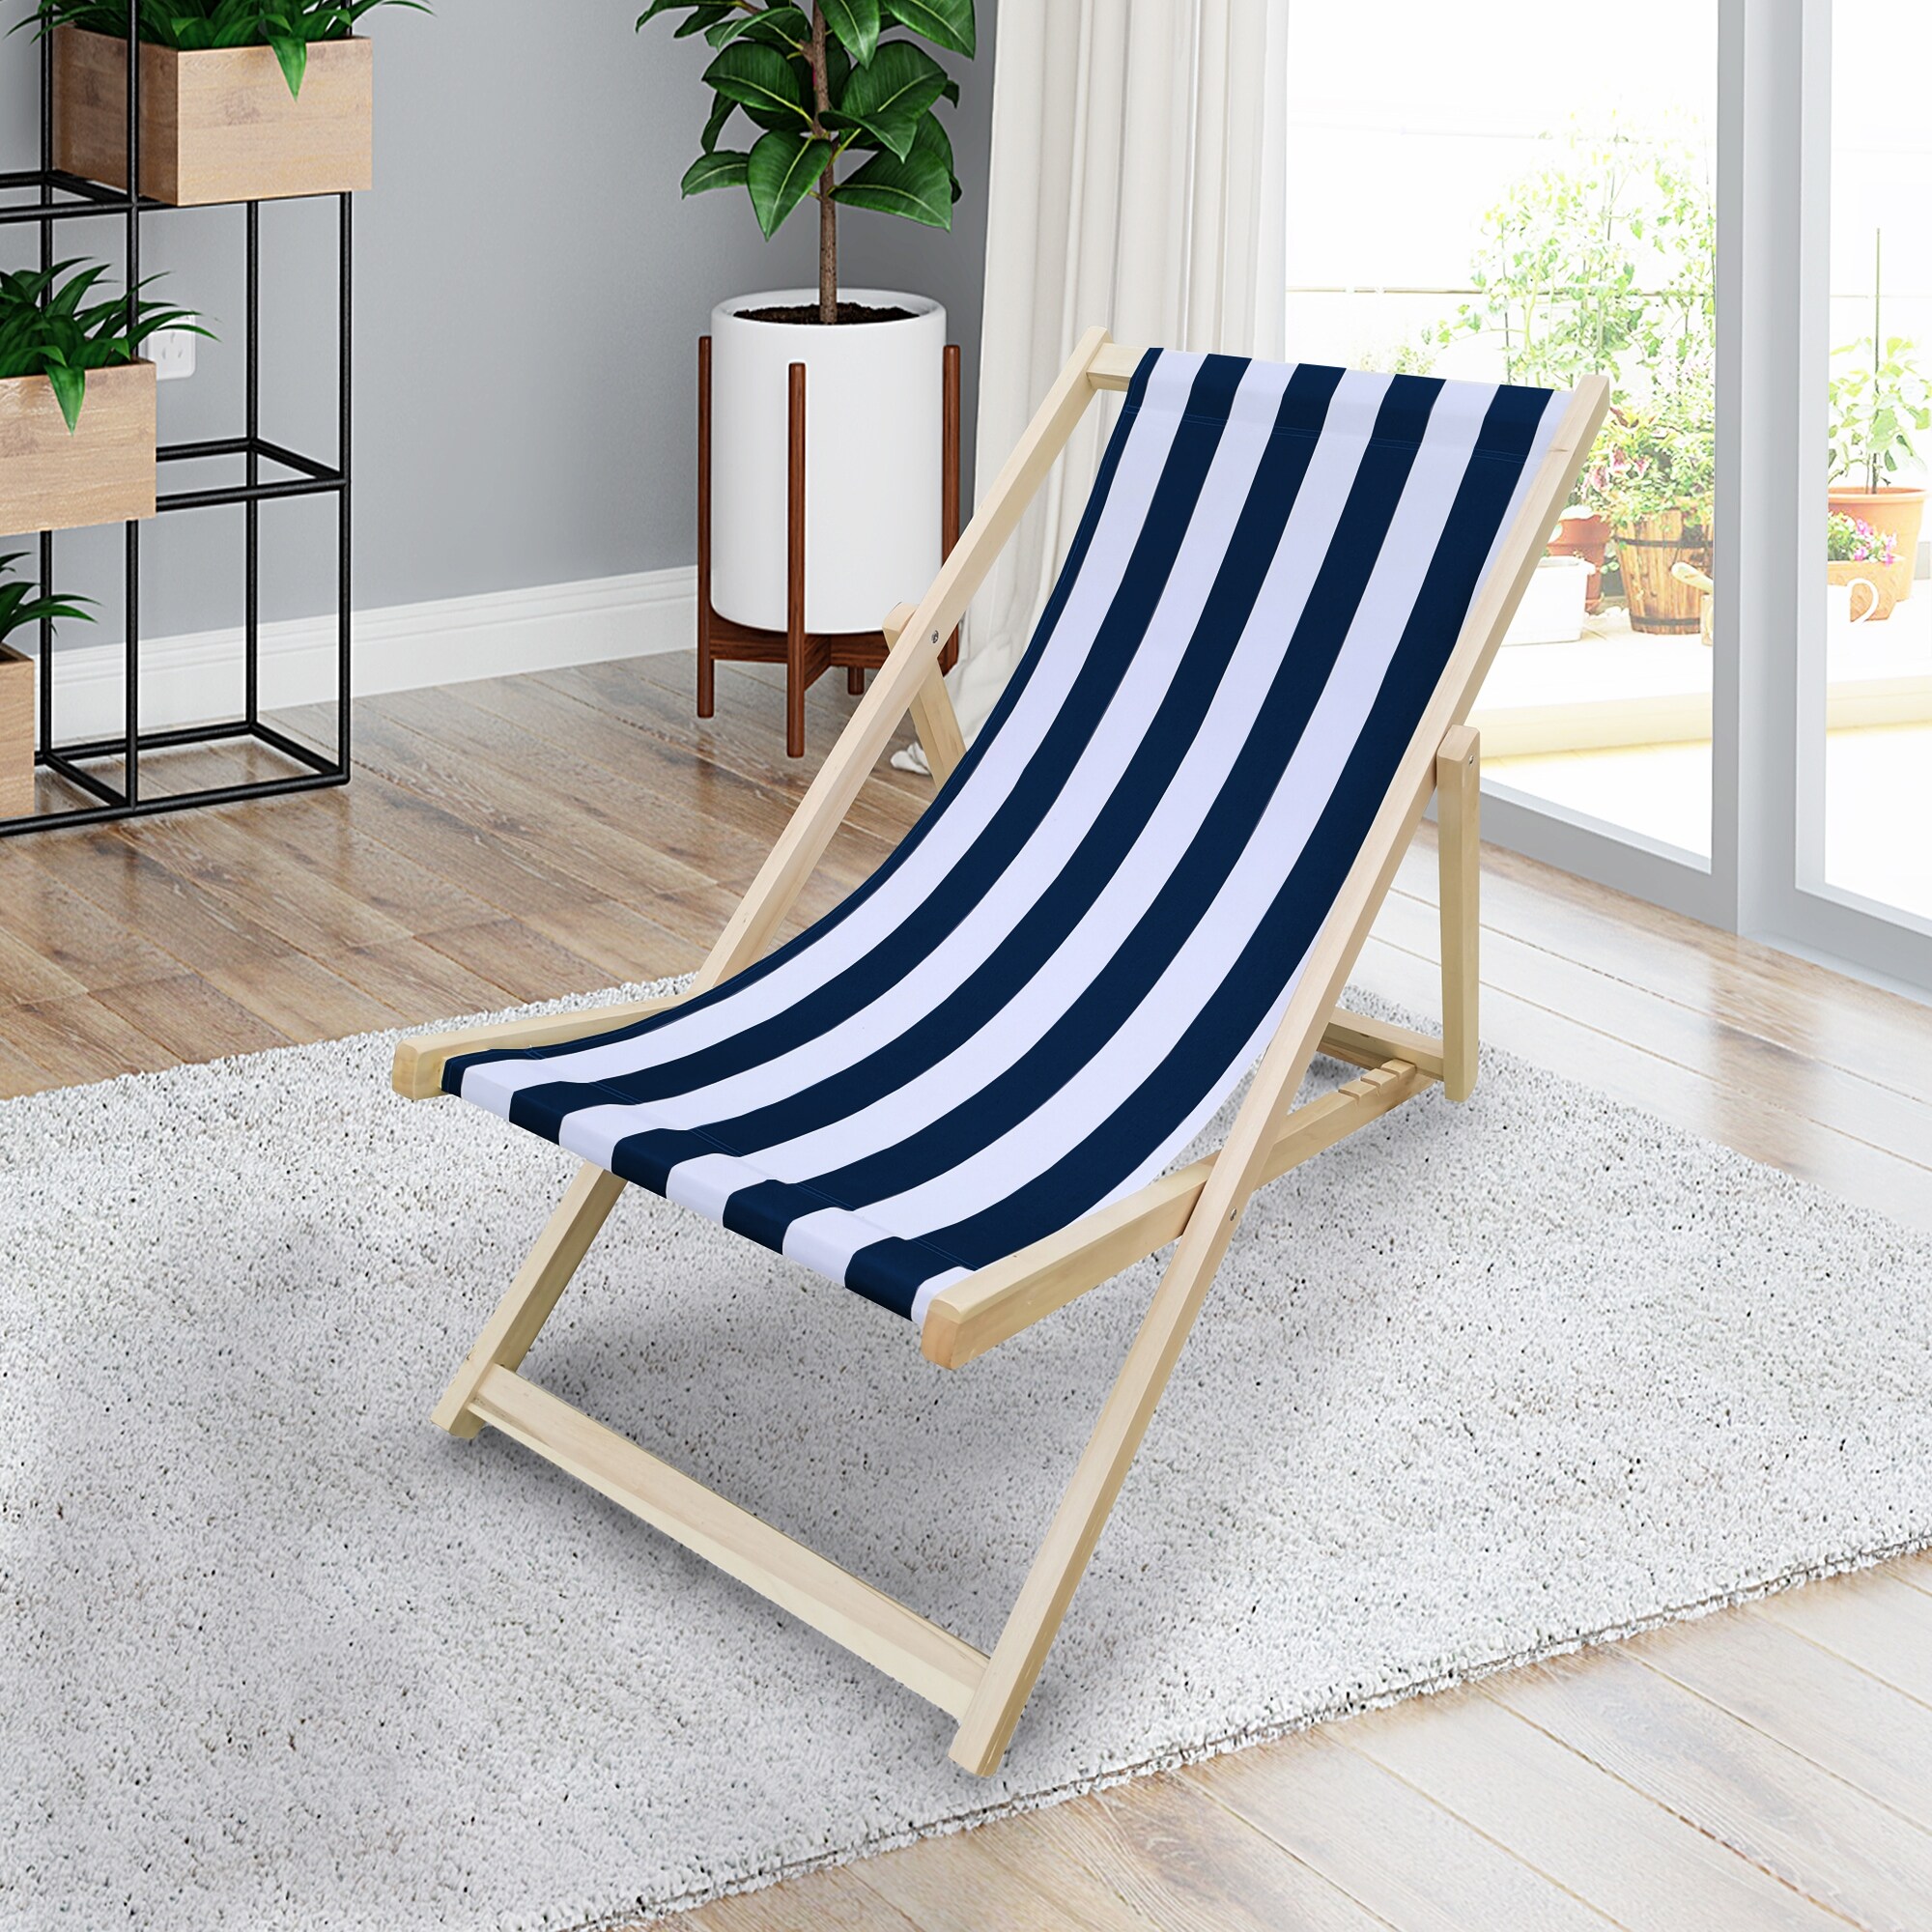 Stripe-folding Beach Chairs For Outdoor Patio Garden Furniture  Adjustable Backrest  No Assembly Needed